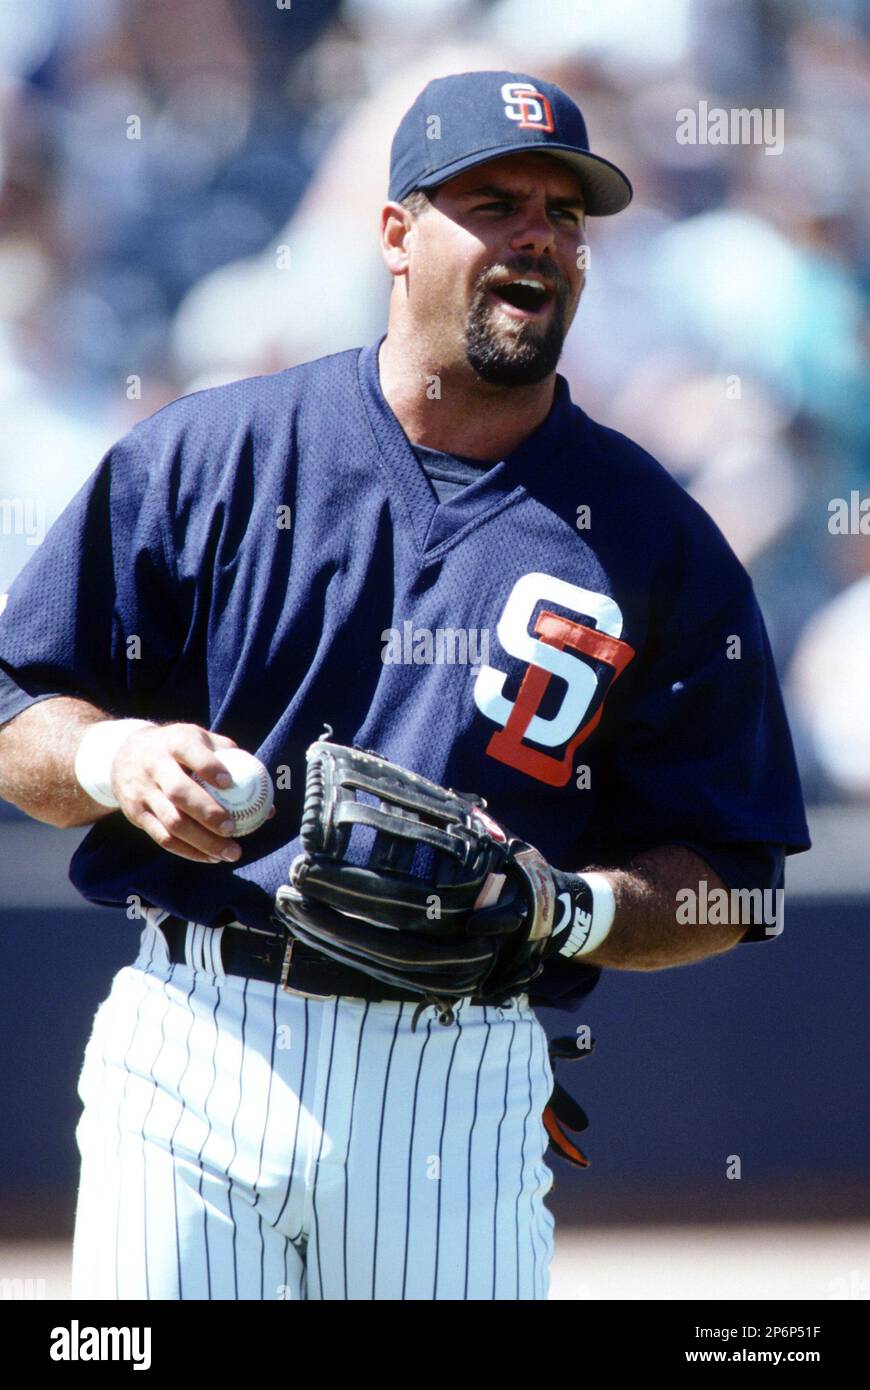 Ken Caminiti of the San Diego Padres at the Peoria Sports Complex